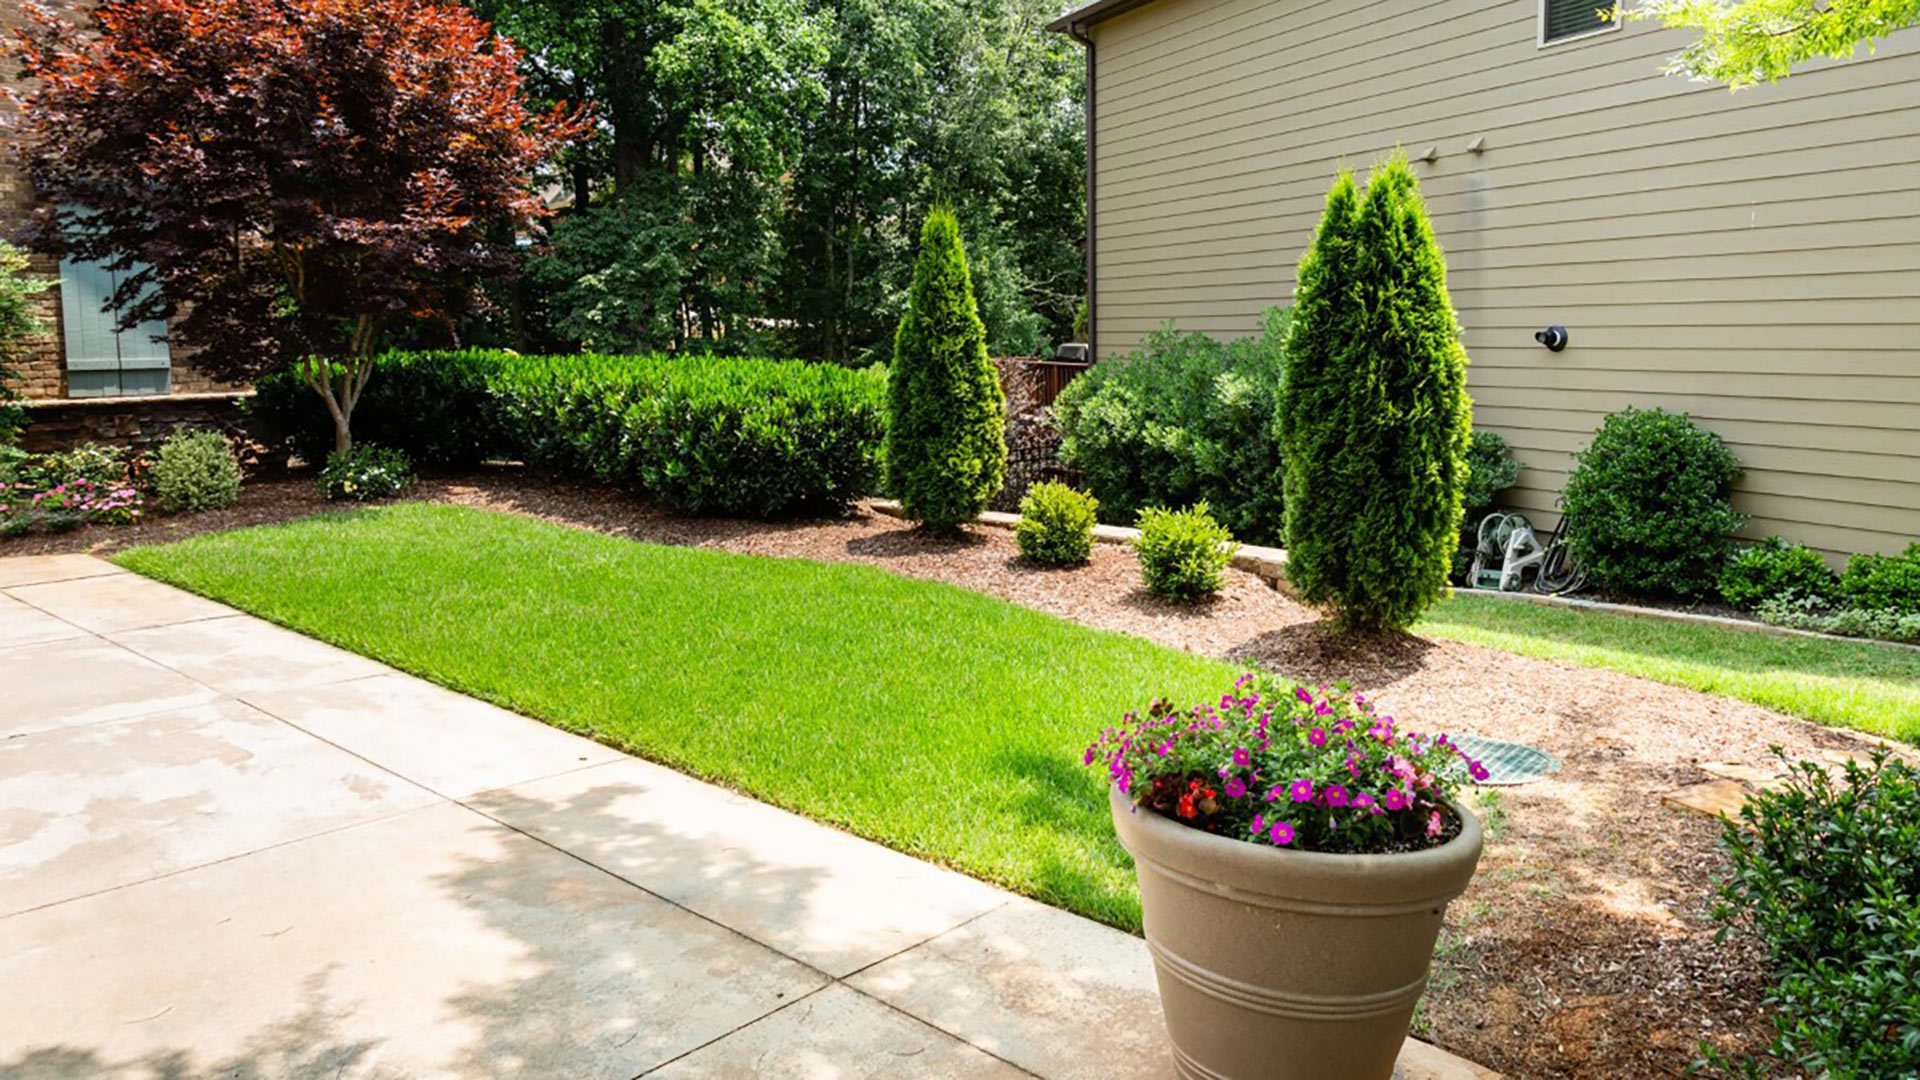 A landscape bed of bushes and shrubs with a pot of flowers in West Chester, PA.